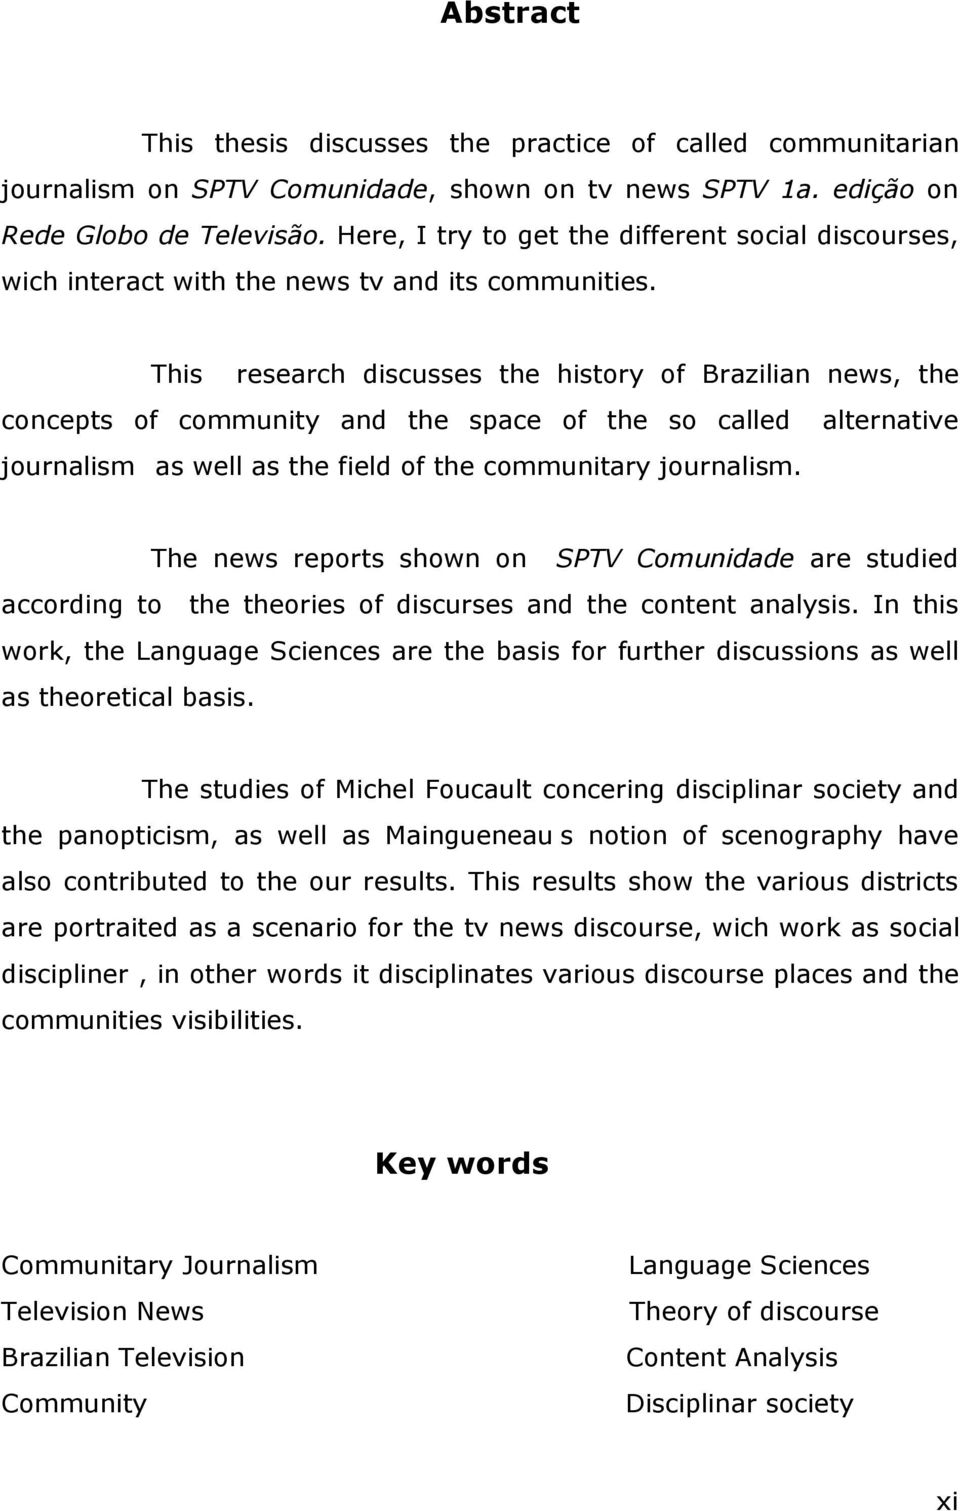 This research discusses the history of Brazilian news, the concepts of community and the space of the so called alternative journalism as well as the field of the communitary journalism.